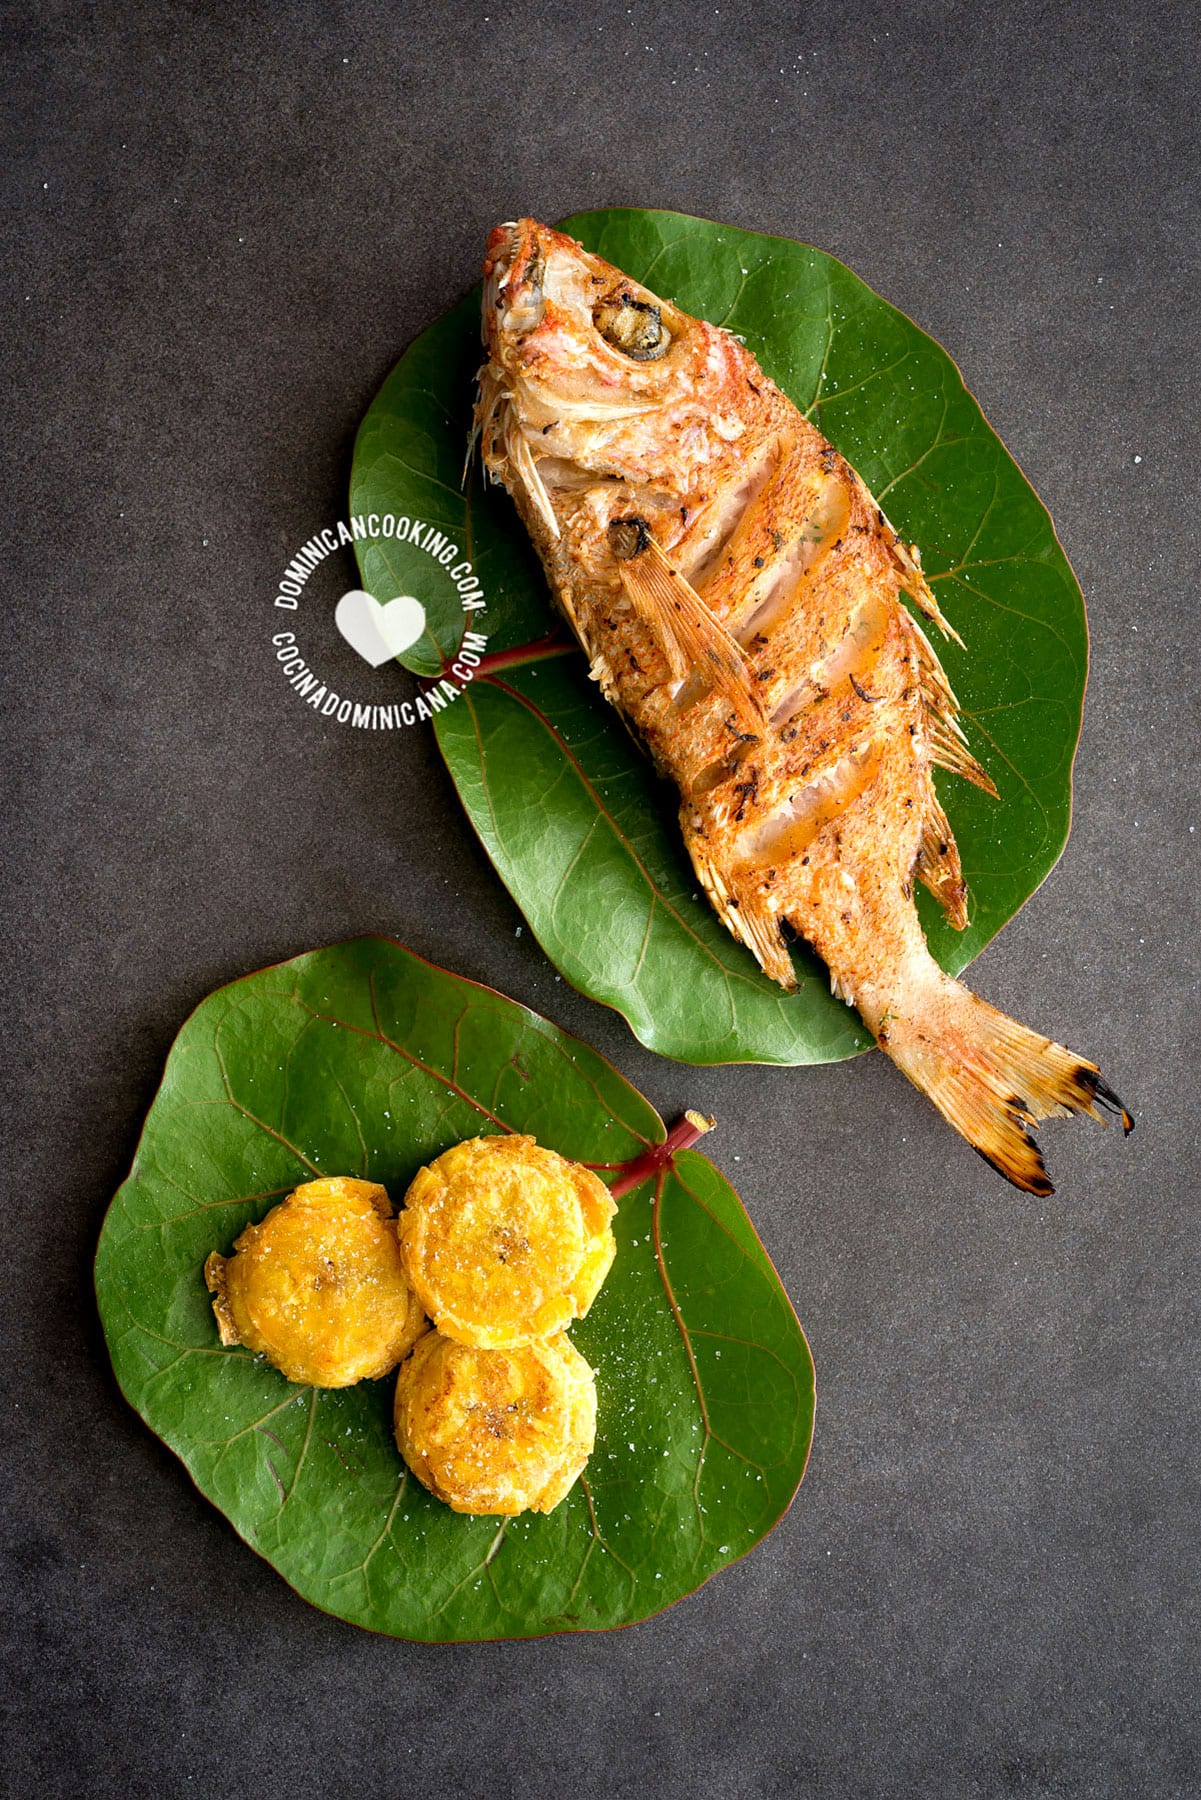 Fried fish (pescado frito) on leaves with fried plantains